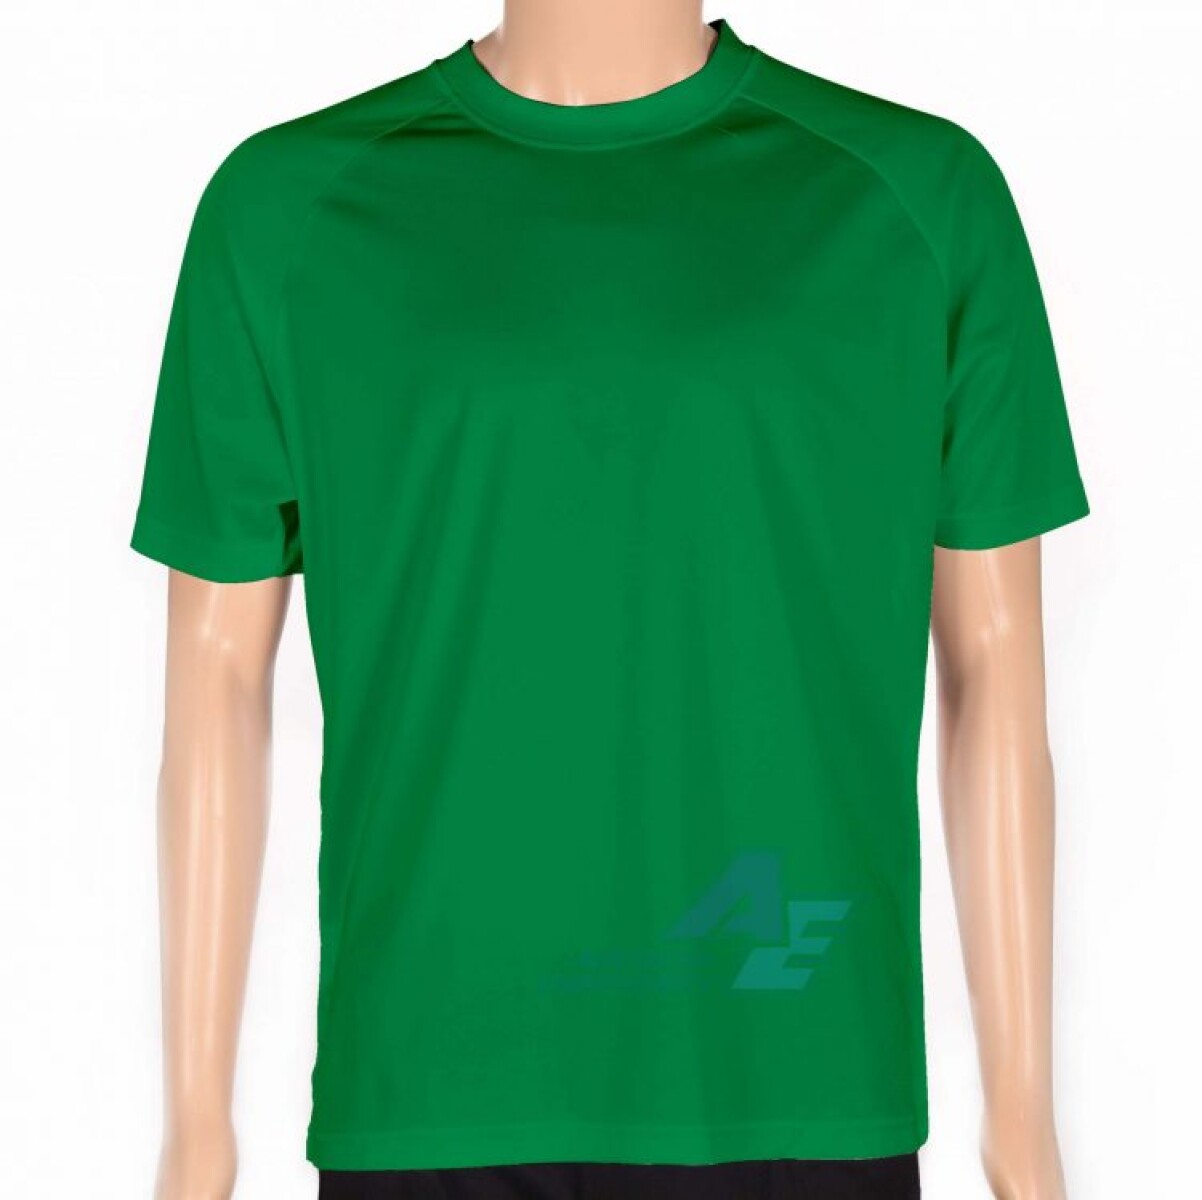 Remera Dry Fit - verde ingles 